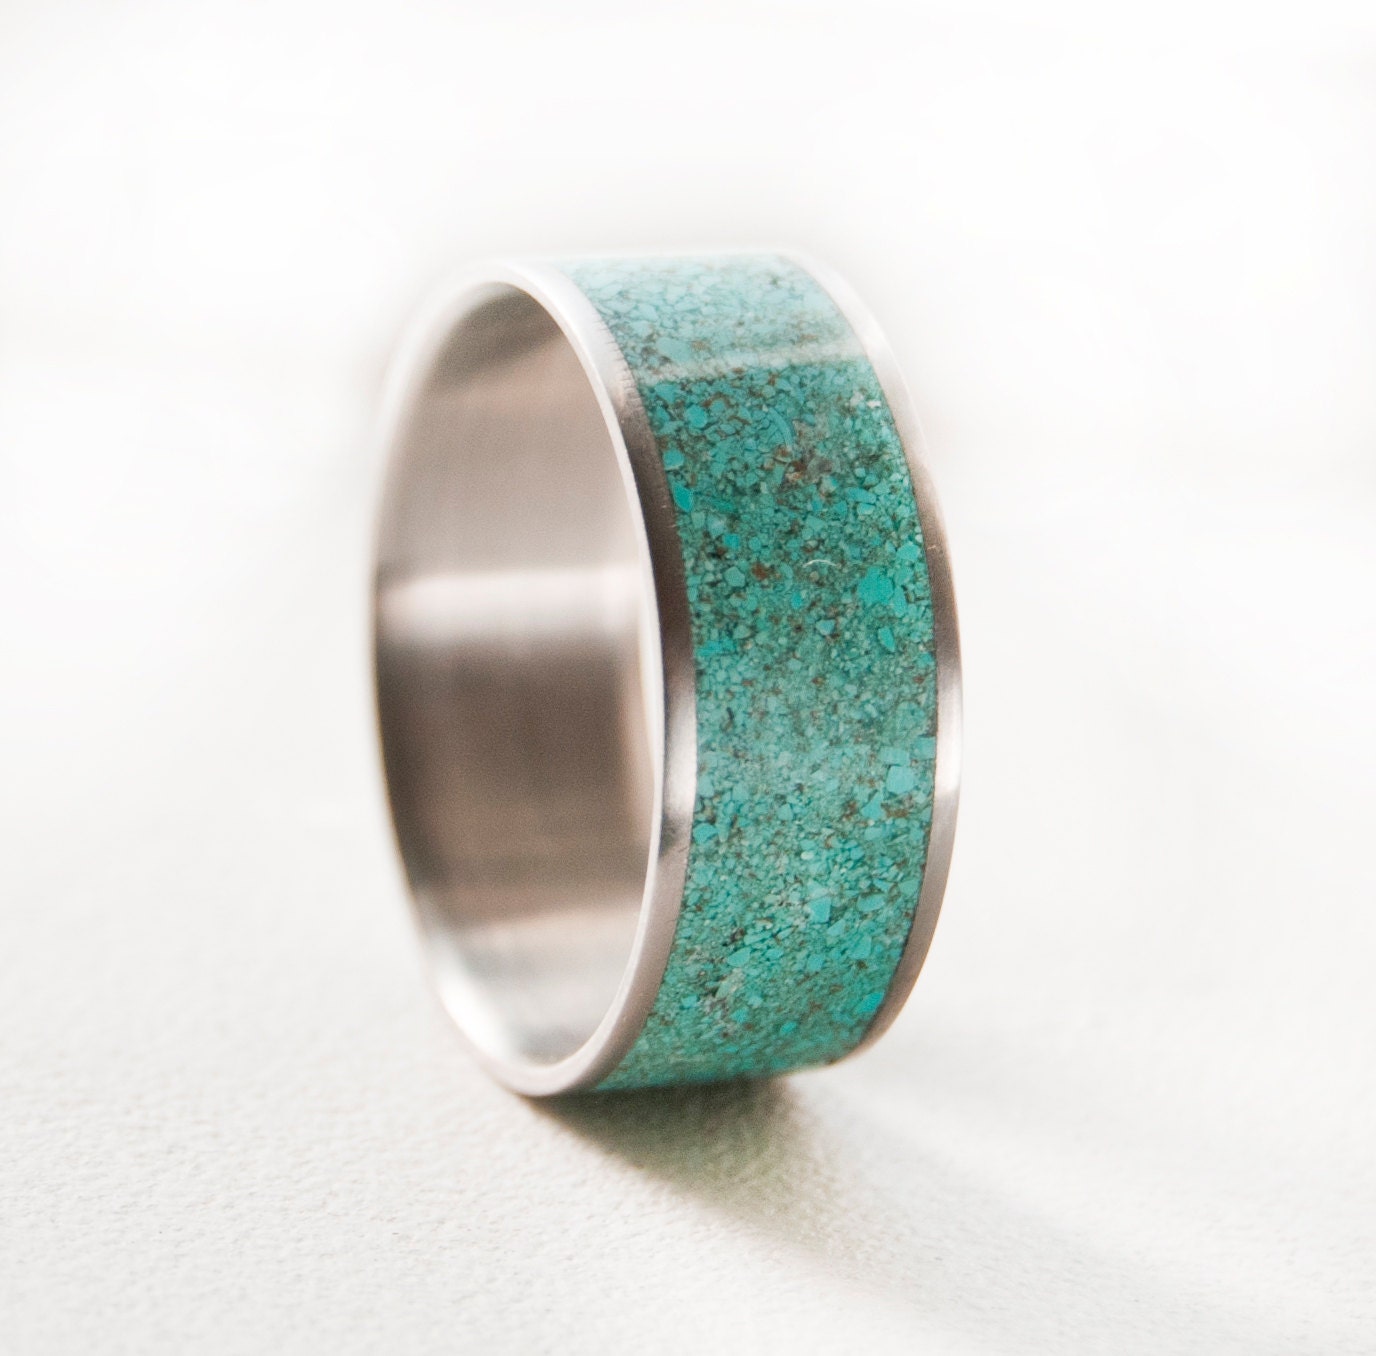 Mens Wedding Band Turquoise Ring by StagHeadDesigns on Etsy